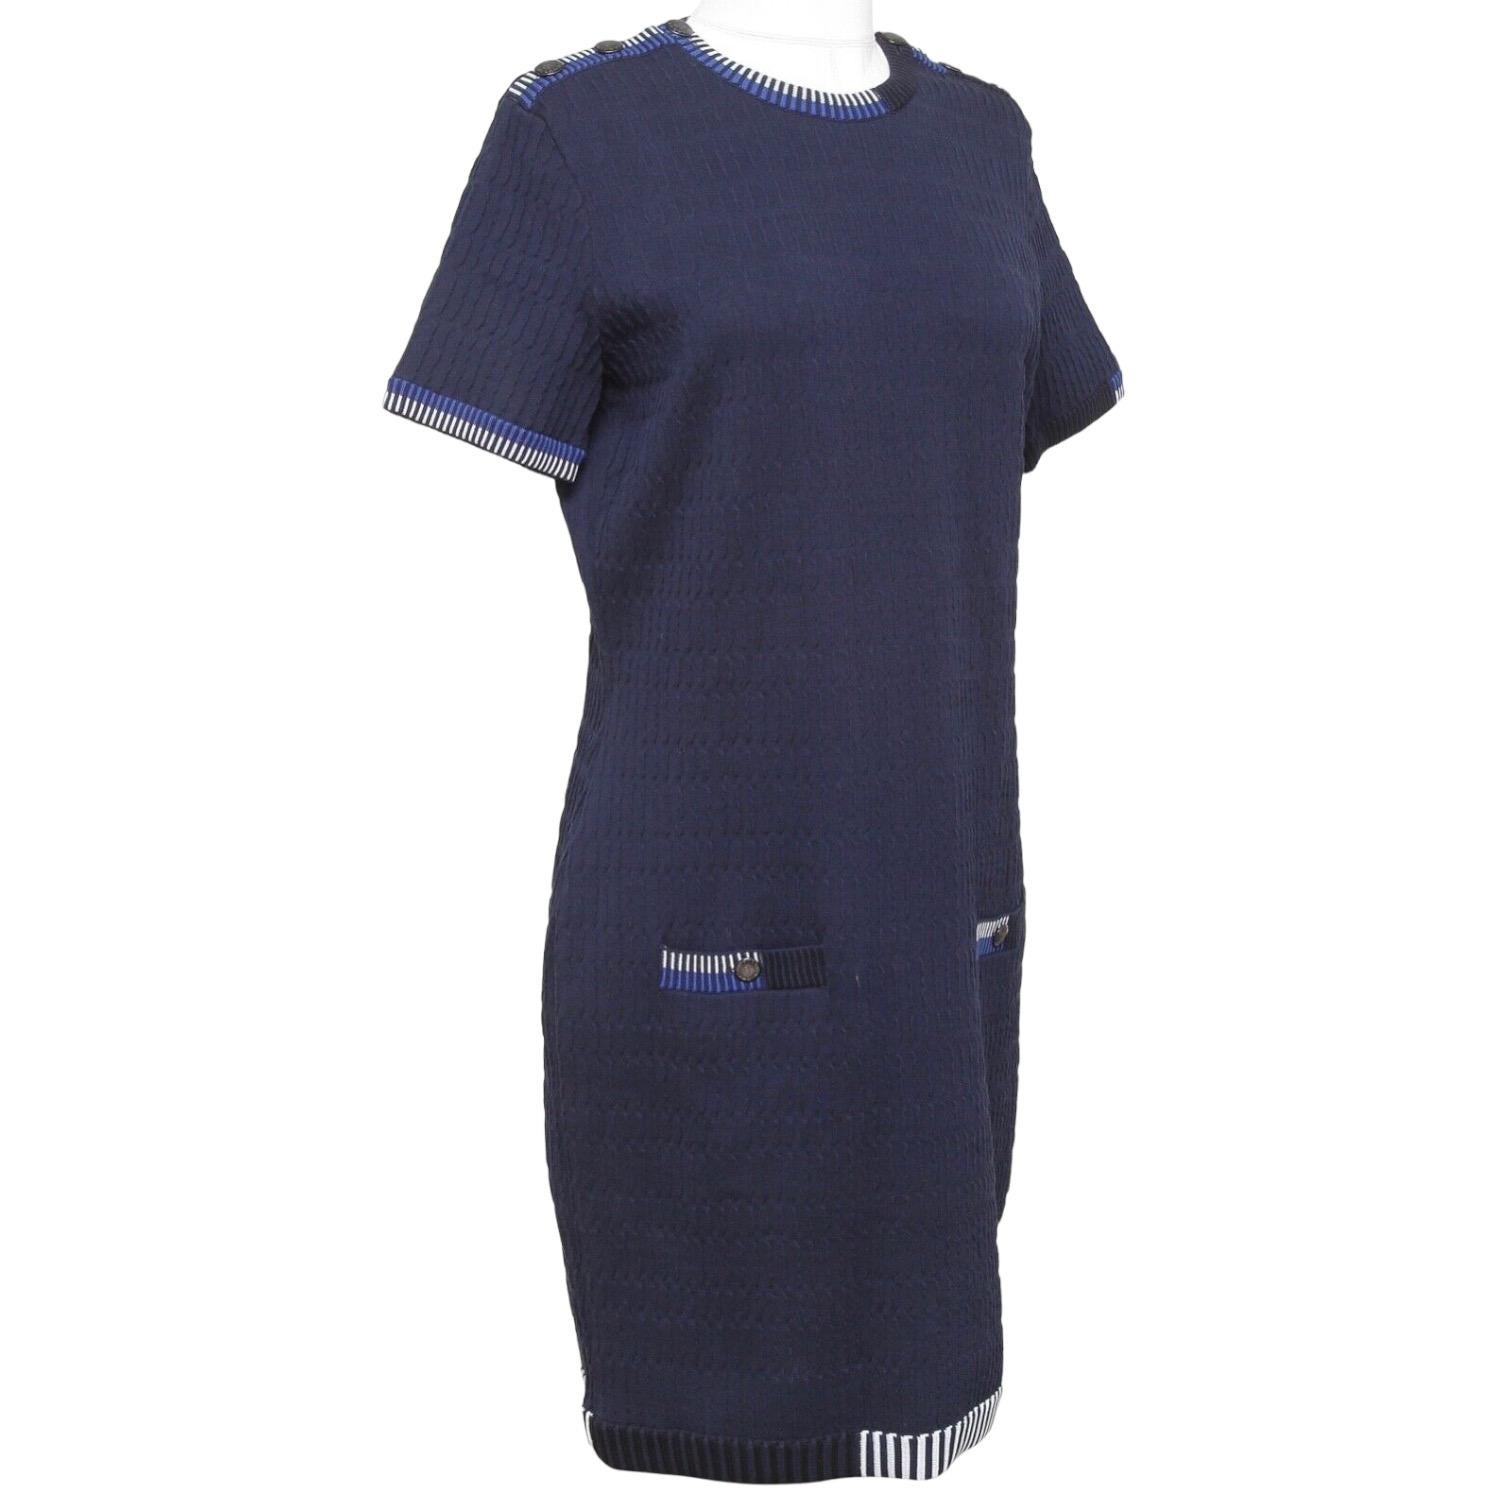 GUARANTEED AUTHENTIC STUNNING CHANEL NAVY BLUE KNIT DRESS


Design:
- Navy blue ribbed stretchy knit dress.
- Blue and white ribbing at edges and pockets.
- Slip pockets at hips with Chanel buttons.
- Three buttons on each shoulder..
-